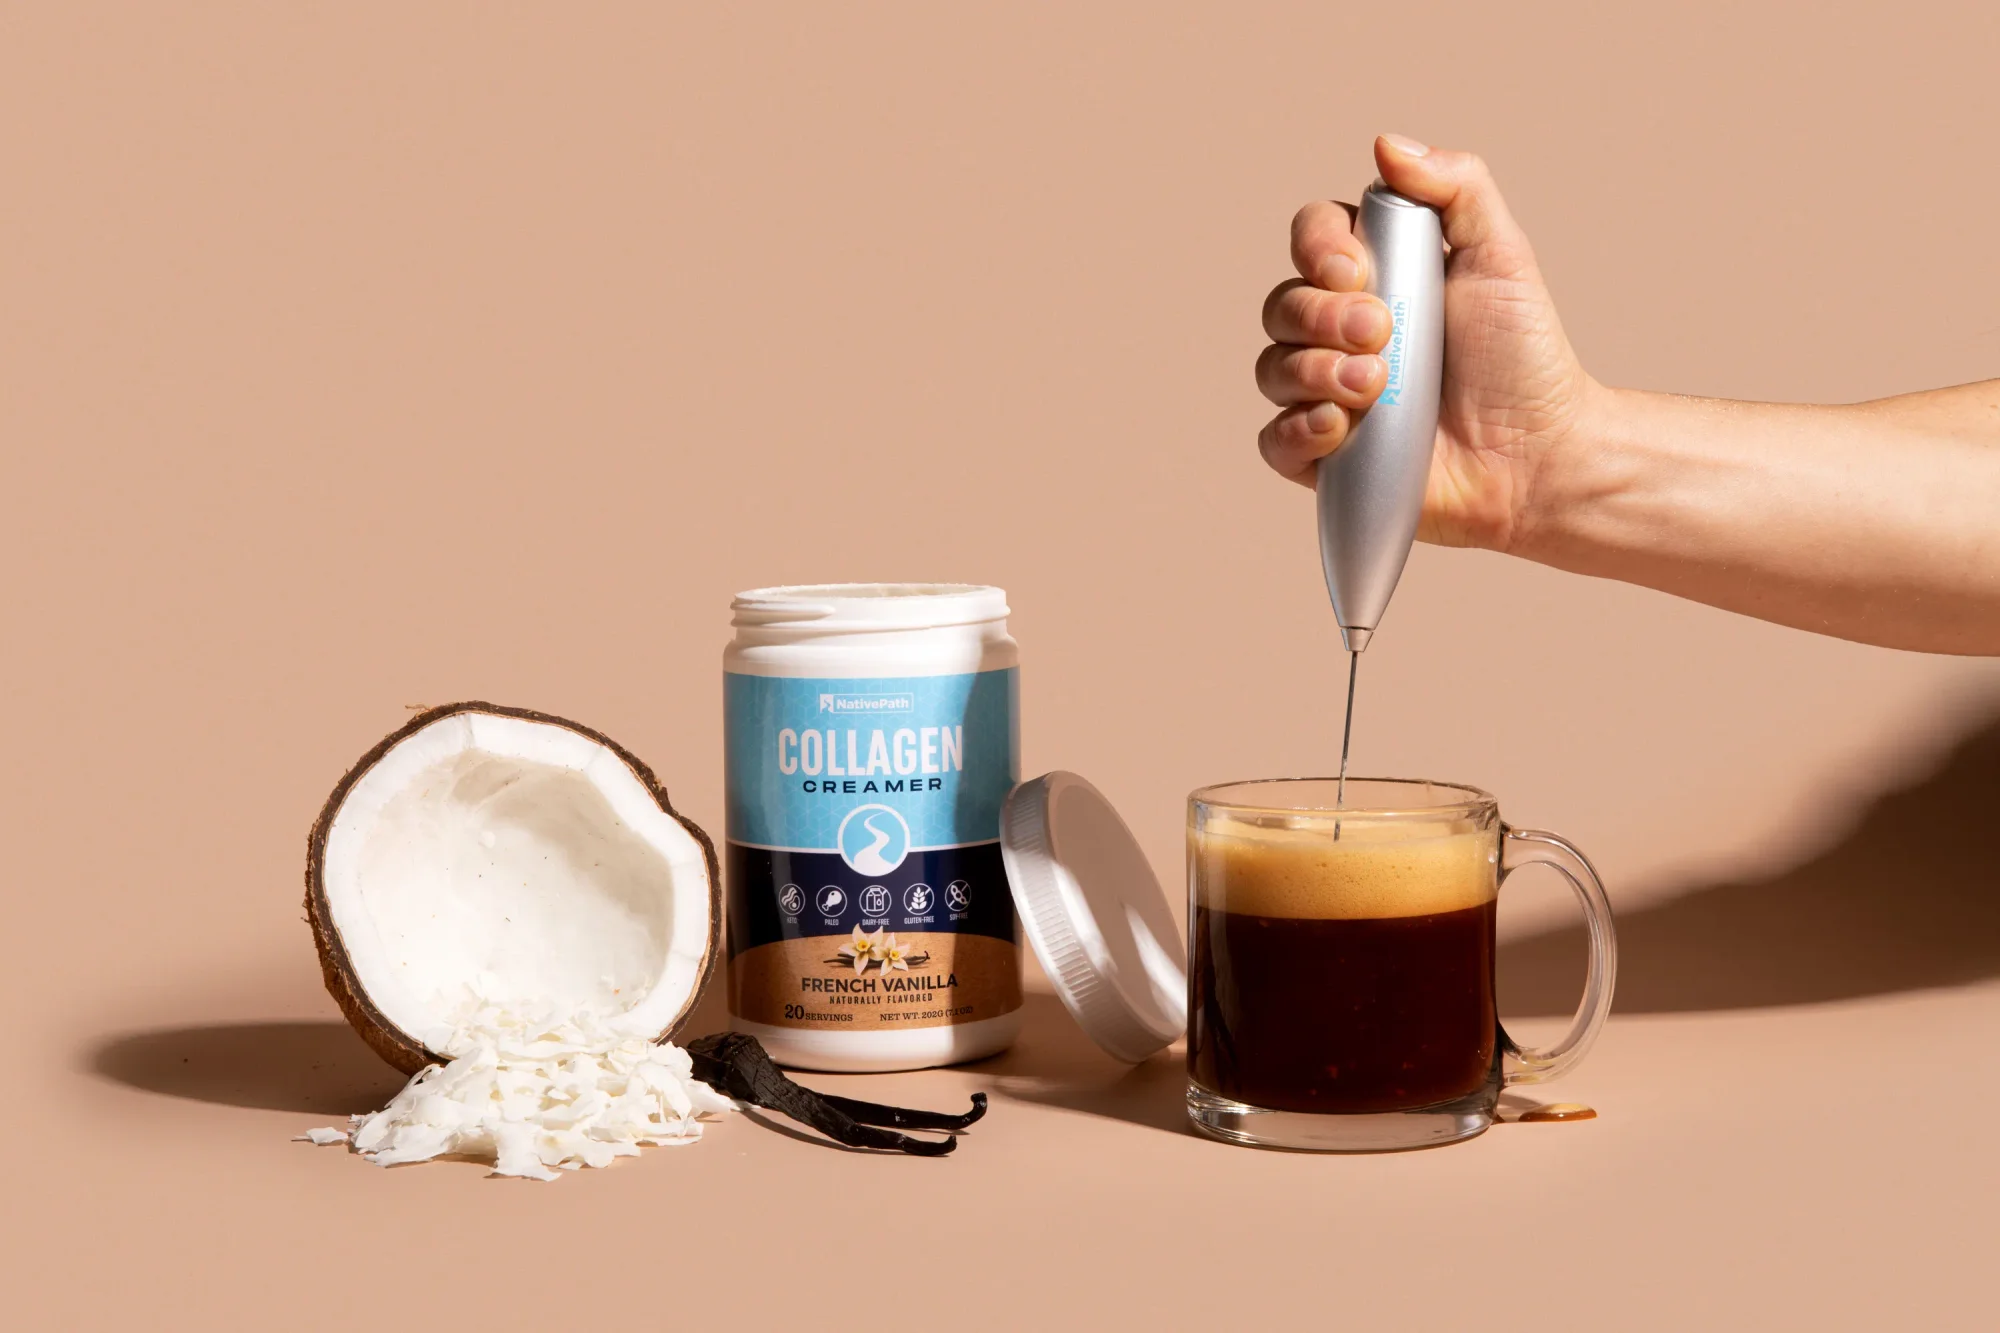 Hand frothing a scoop of NativePath Collagen Creamer in a clear cup of black coffee. Collagen creamer jar next to mug with vanilla bean and a halved coconut next to it.